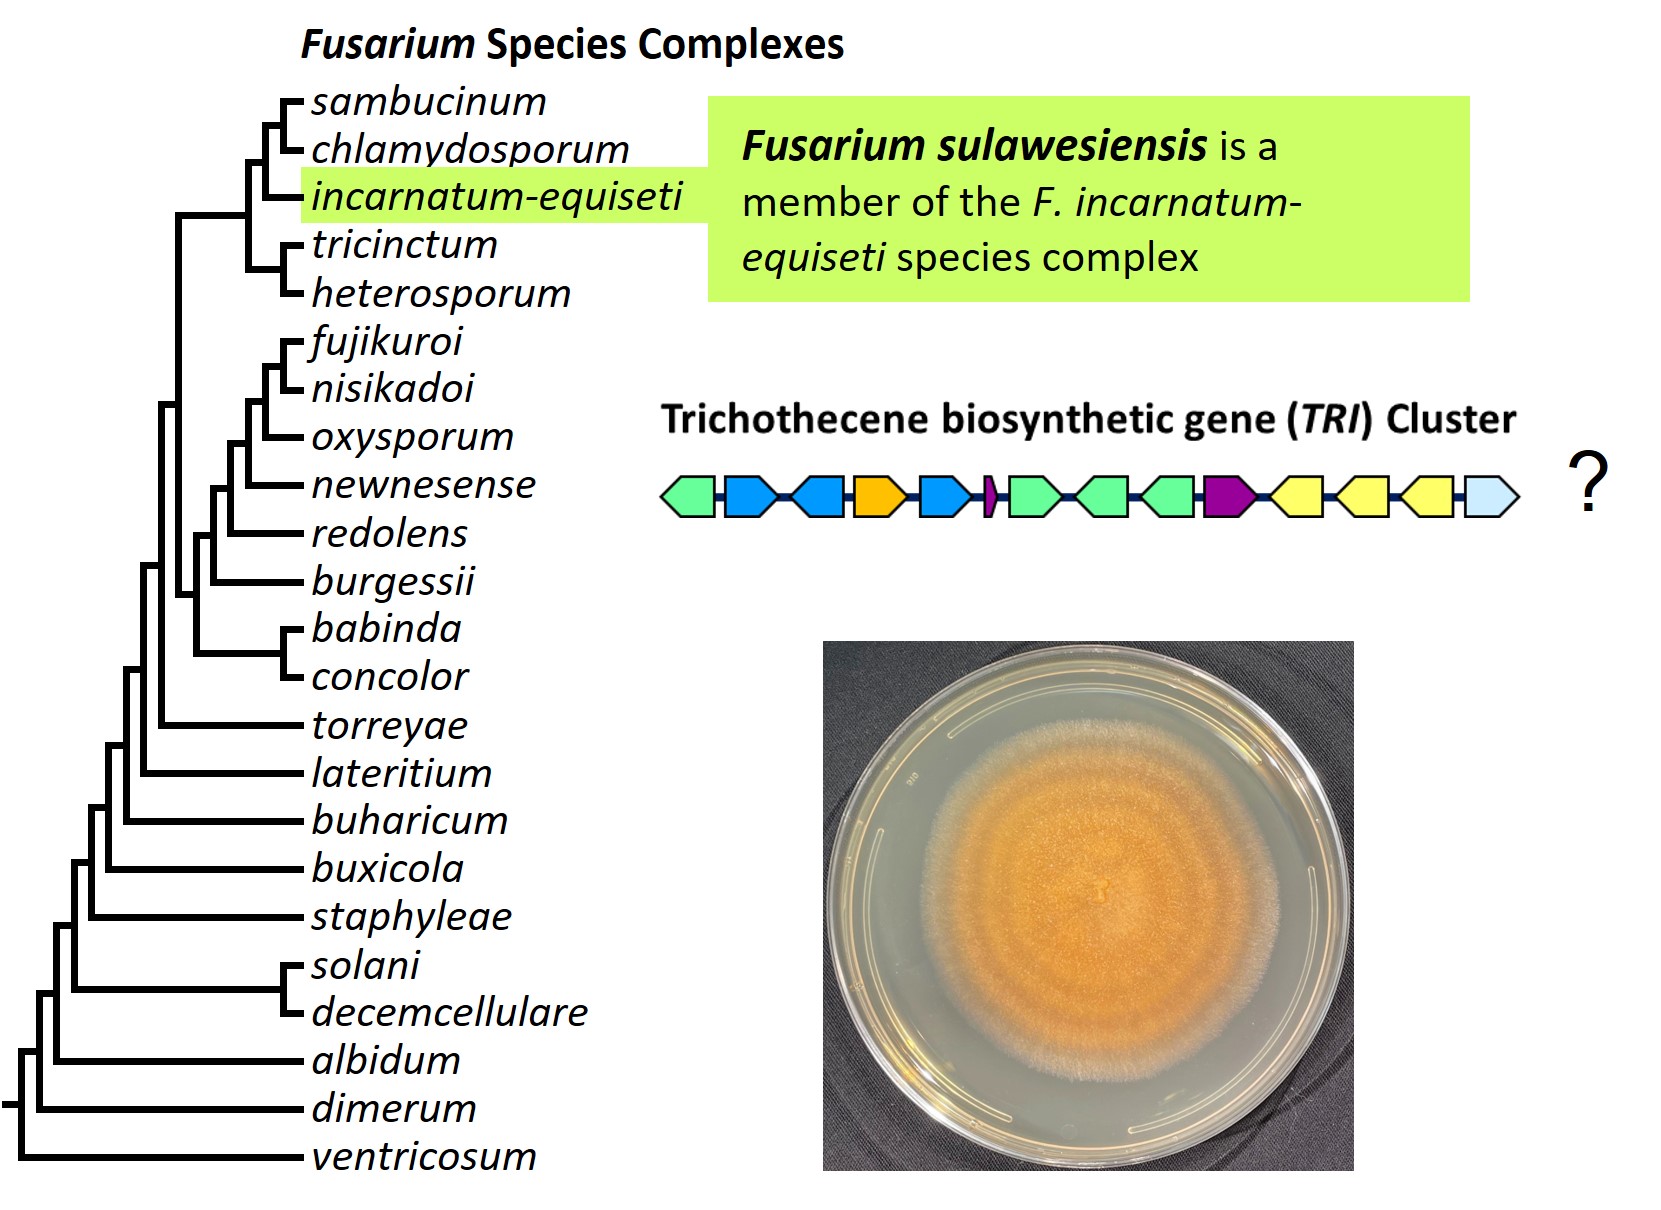 Left &ndash; tree showing phylogenetic relationships of the 23
Fusarium species complexes and placement of F. sulawesiensis within
the F. incarnatum-equiseti species complex. In the tree, species
complex names are abbreviated using specific epithets of the
species after which the complexes are named (e.g., the F.
sambucinum species complex is abbreviated as sambucinum). Middle
right &ndash; trichothecene mycotoxin biosynthetic gene cluster in
F. sulawesiensis. Bottom right &ndash; culture of F. sulawesiensis
NRRL 66472 growing on potato dextrose agar medium. Image credit:
Robert H. Proctor, Amy McGovern and Crystal Probyn.